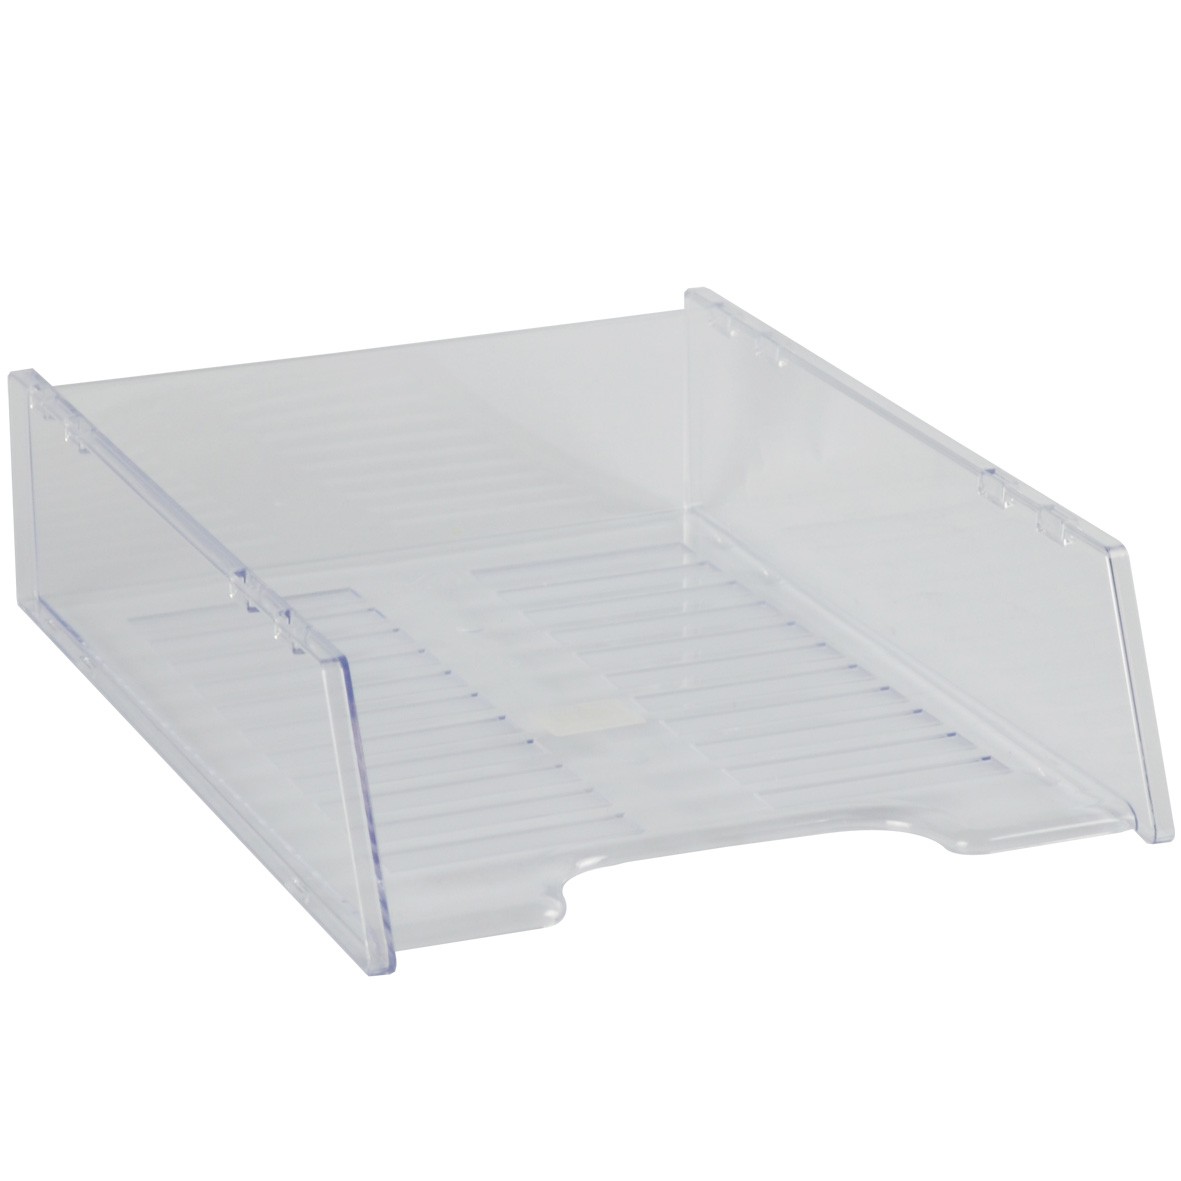 DOCUMENT TRAY STACKABLE CLEAR #I-60CLR 